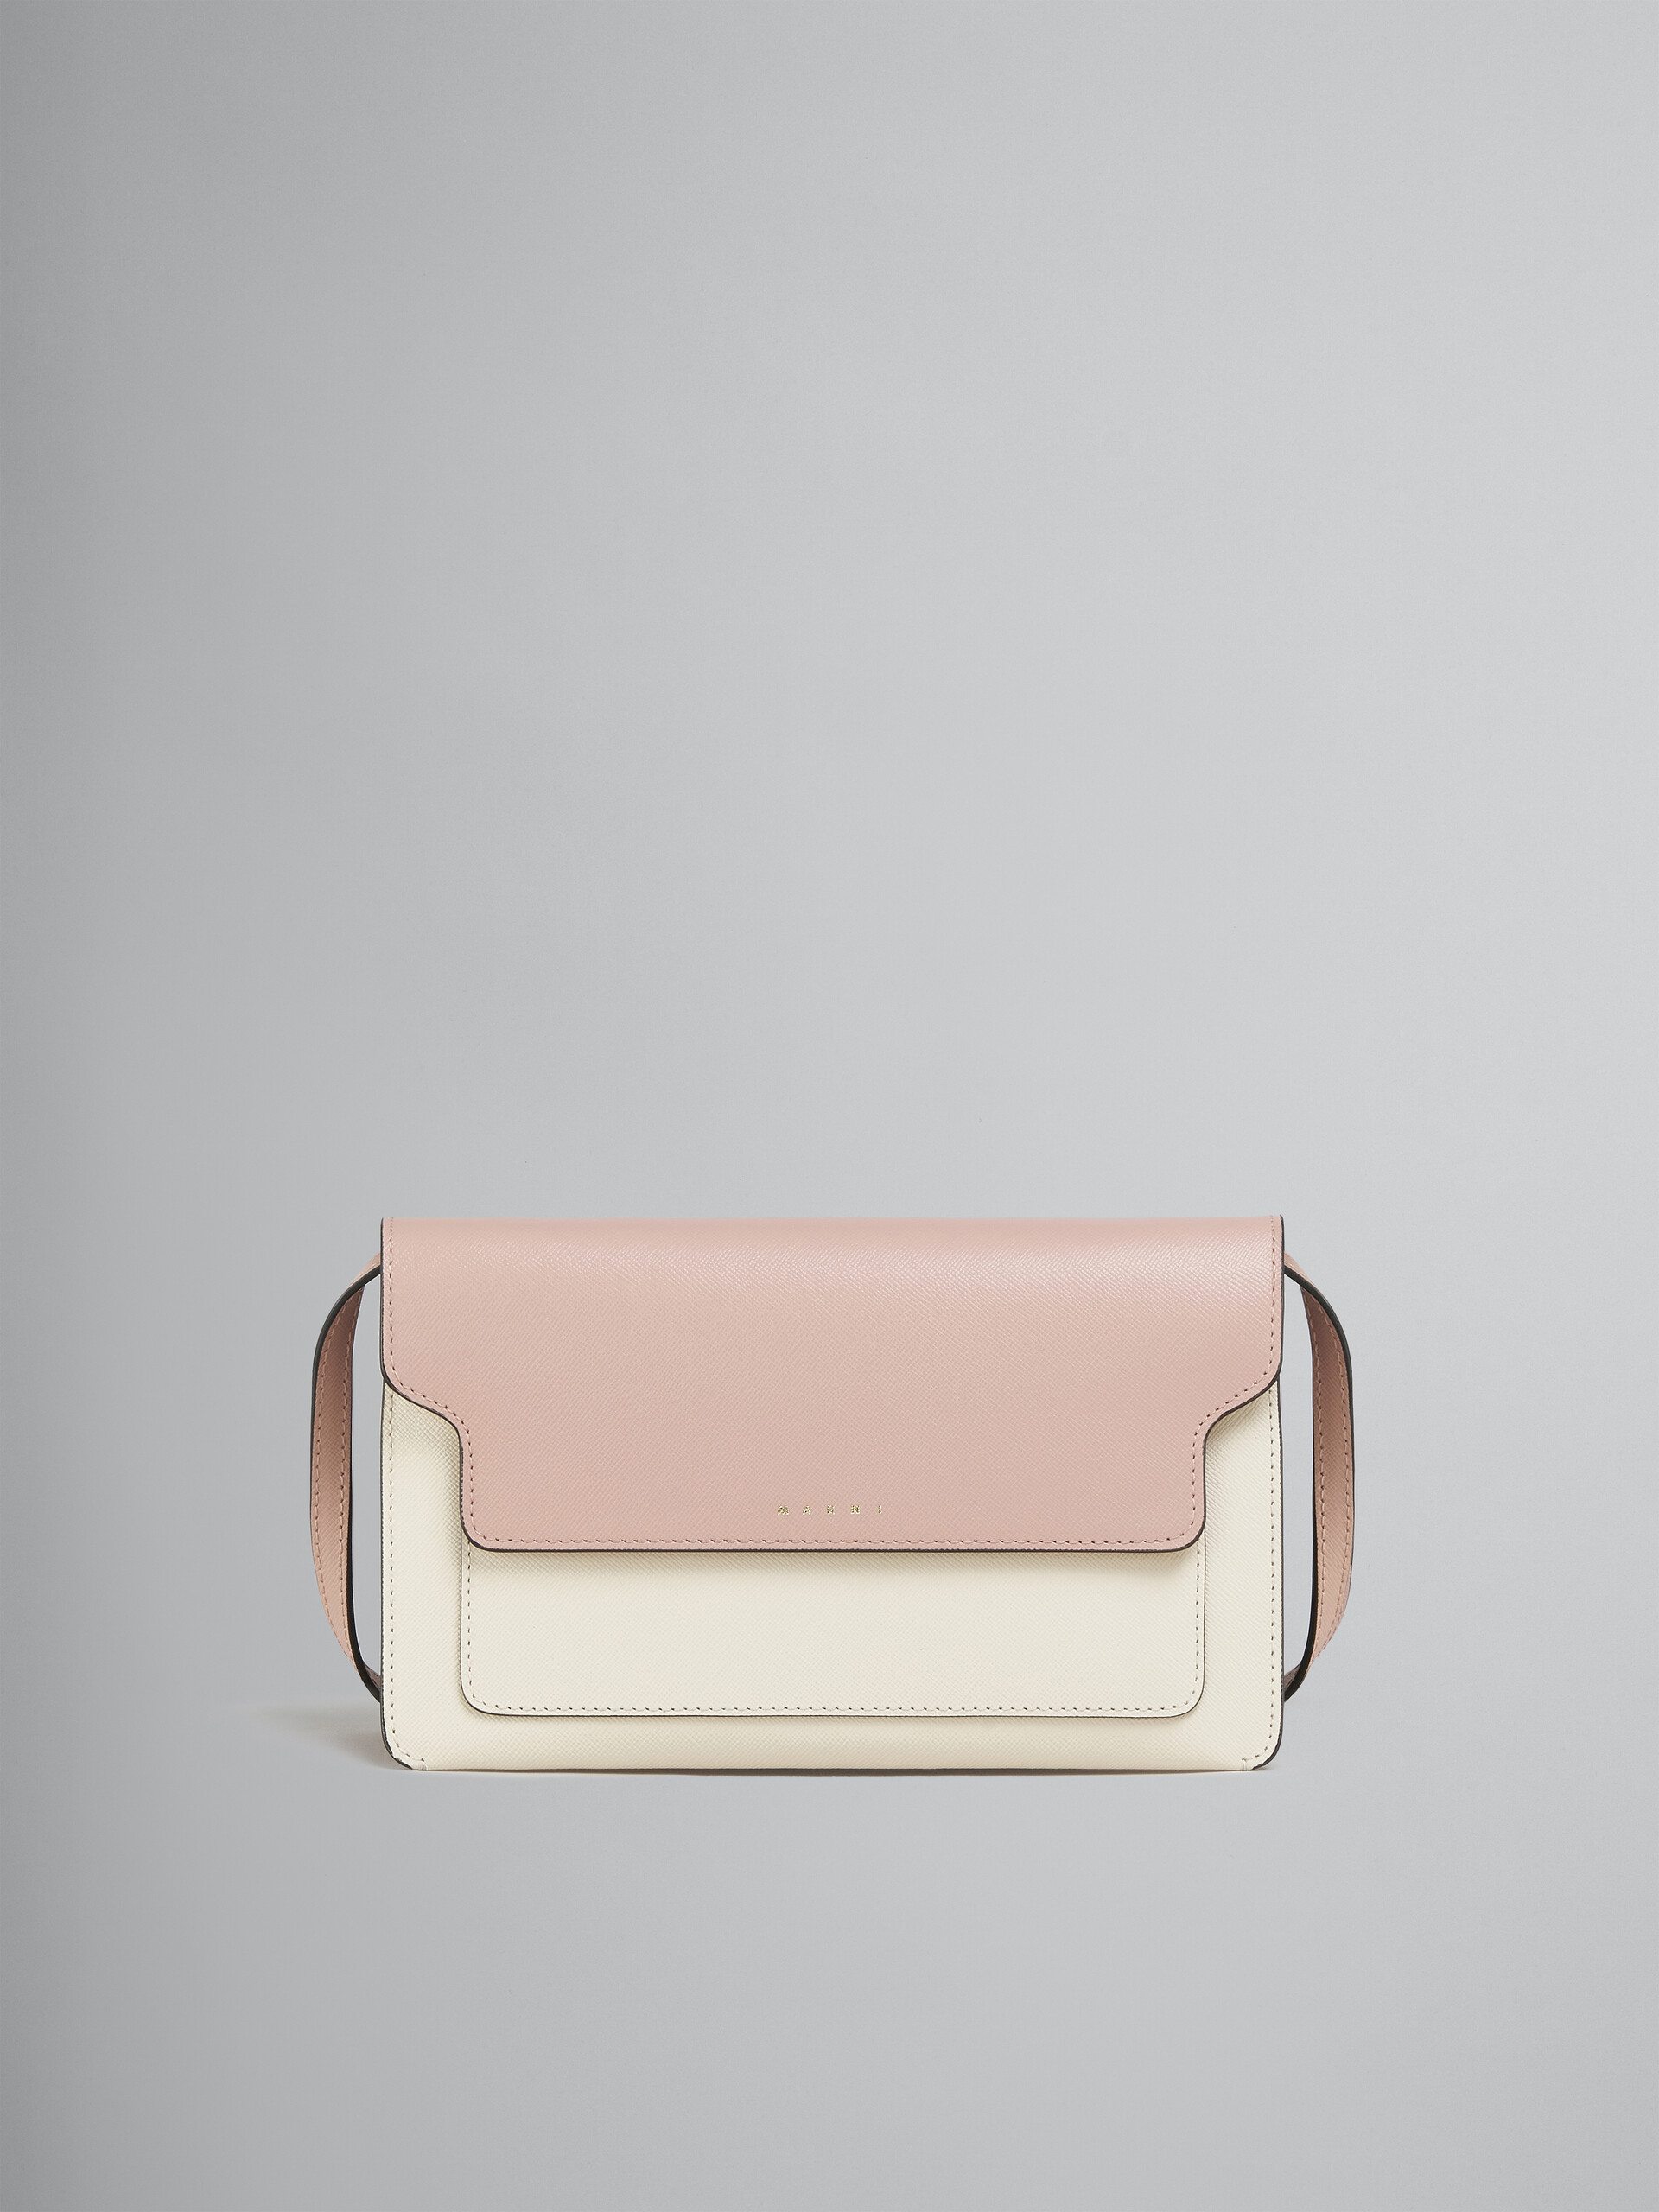 Trunk Clutch in pink white and beige saffiano leather - Pochettes - Image 1